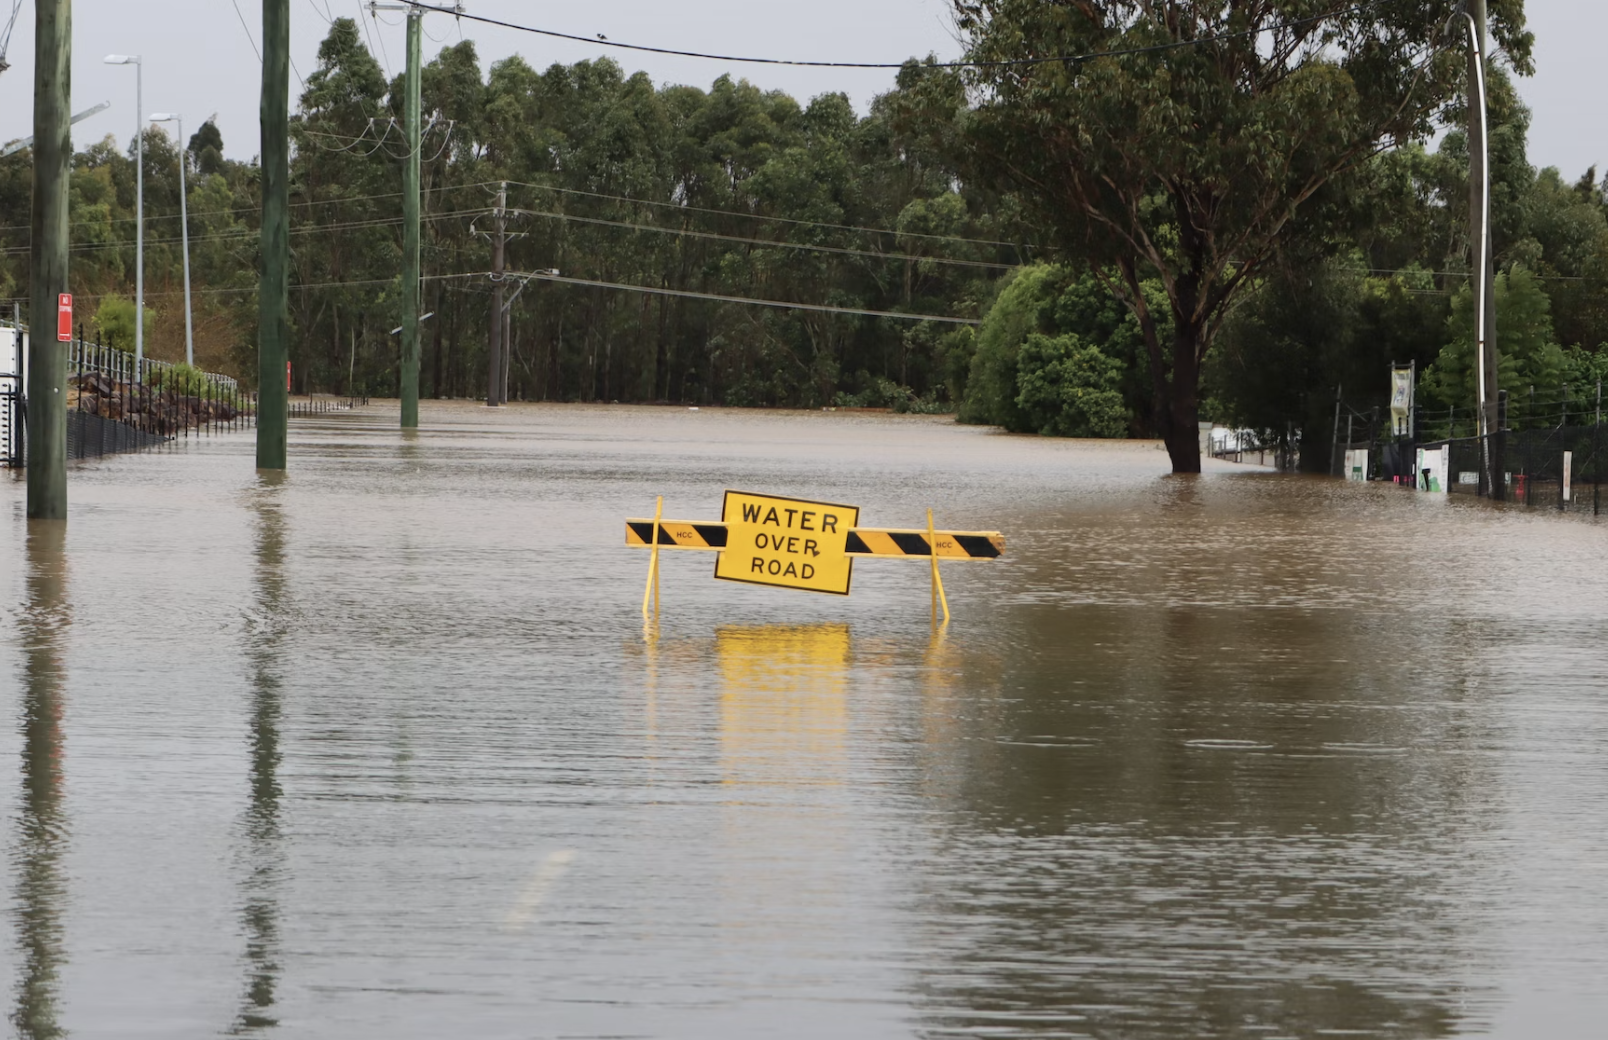 A flooded road in Australia, with a yellow sign saying water over road